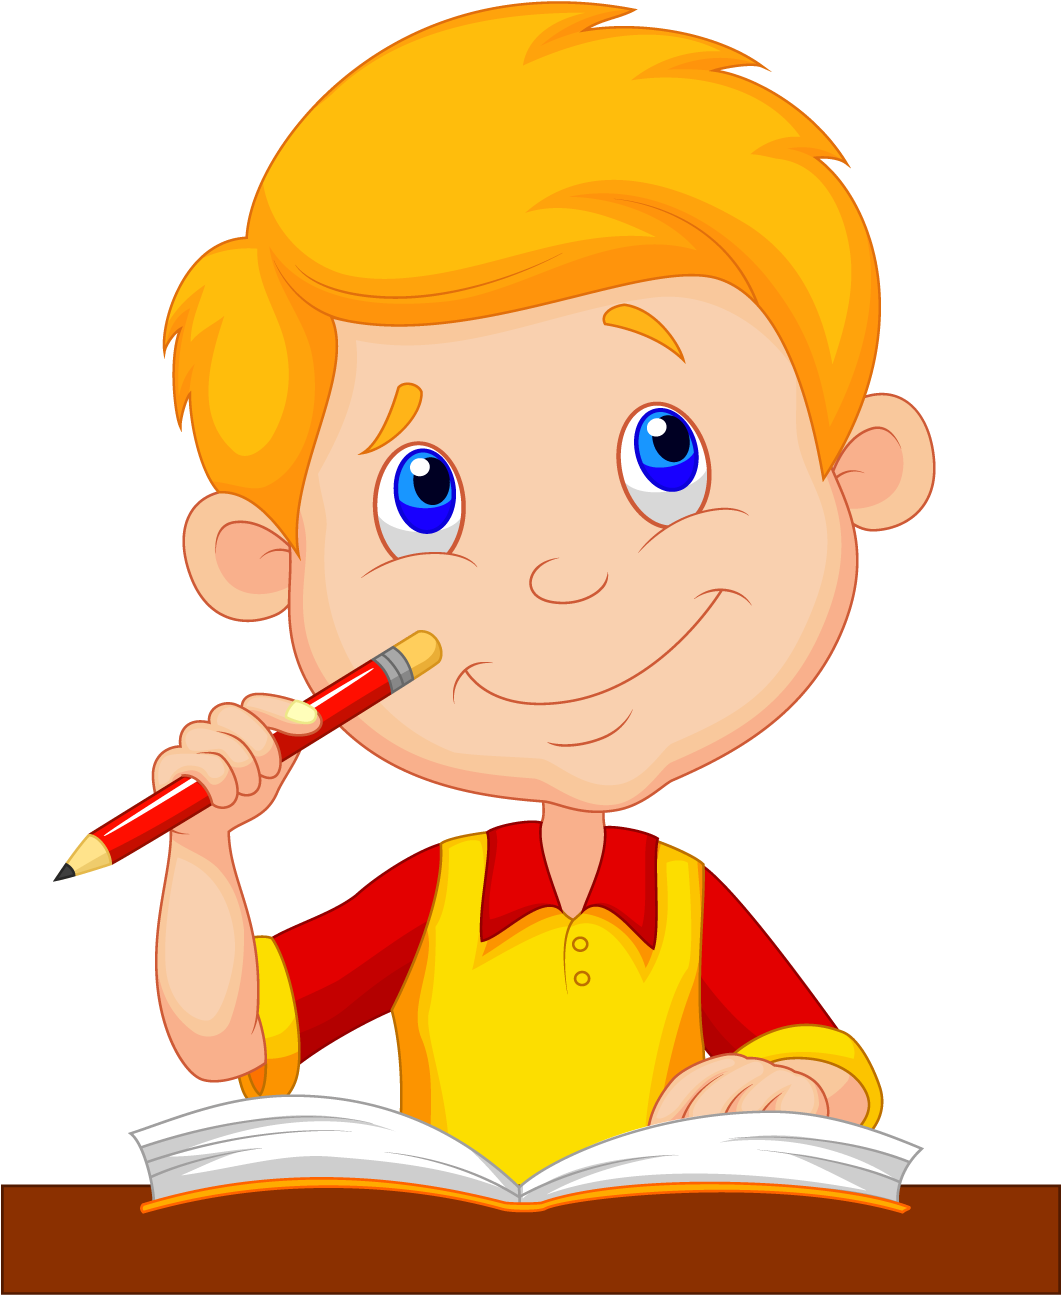 Cartoon Drawing Child - Cartoon Picture Of A Boy Studying (1249x1386)